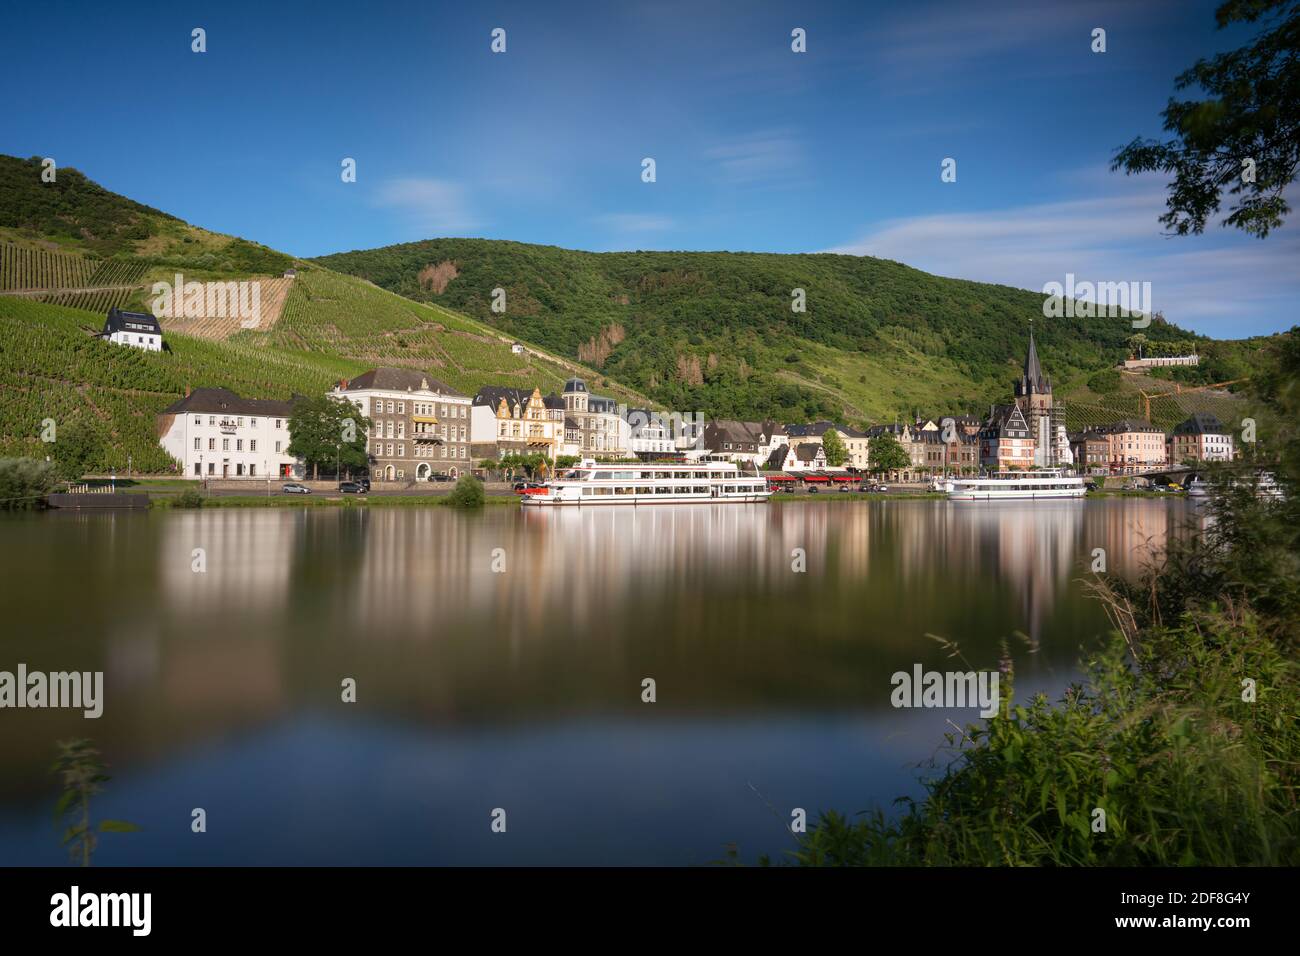 Panoramic Image Of Bernkastel Close To The Moselle River At Sunset, Germany Stock Photo